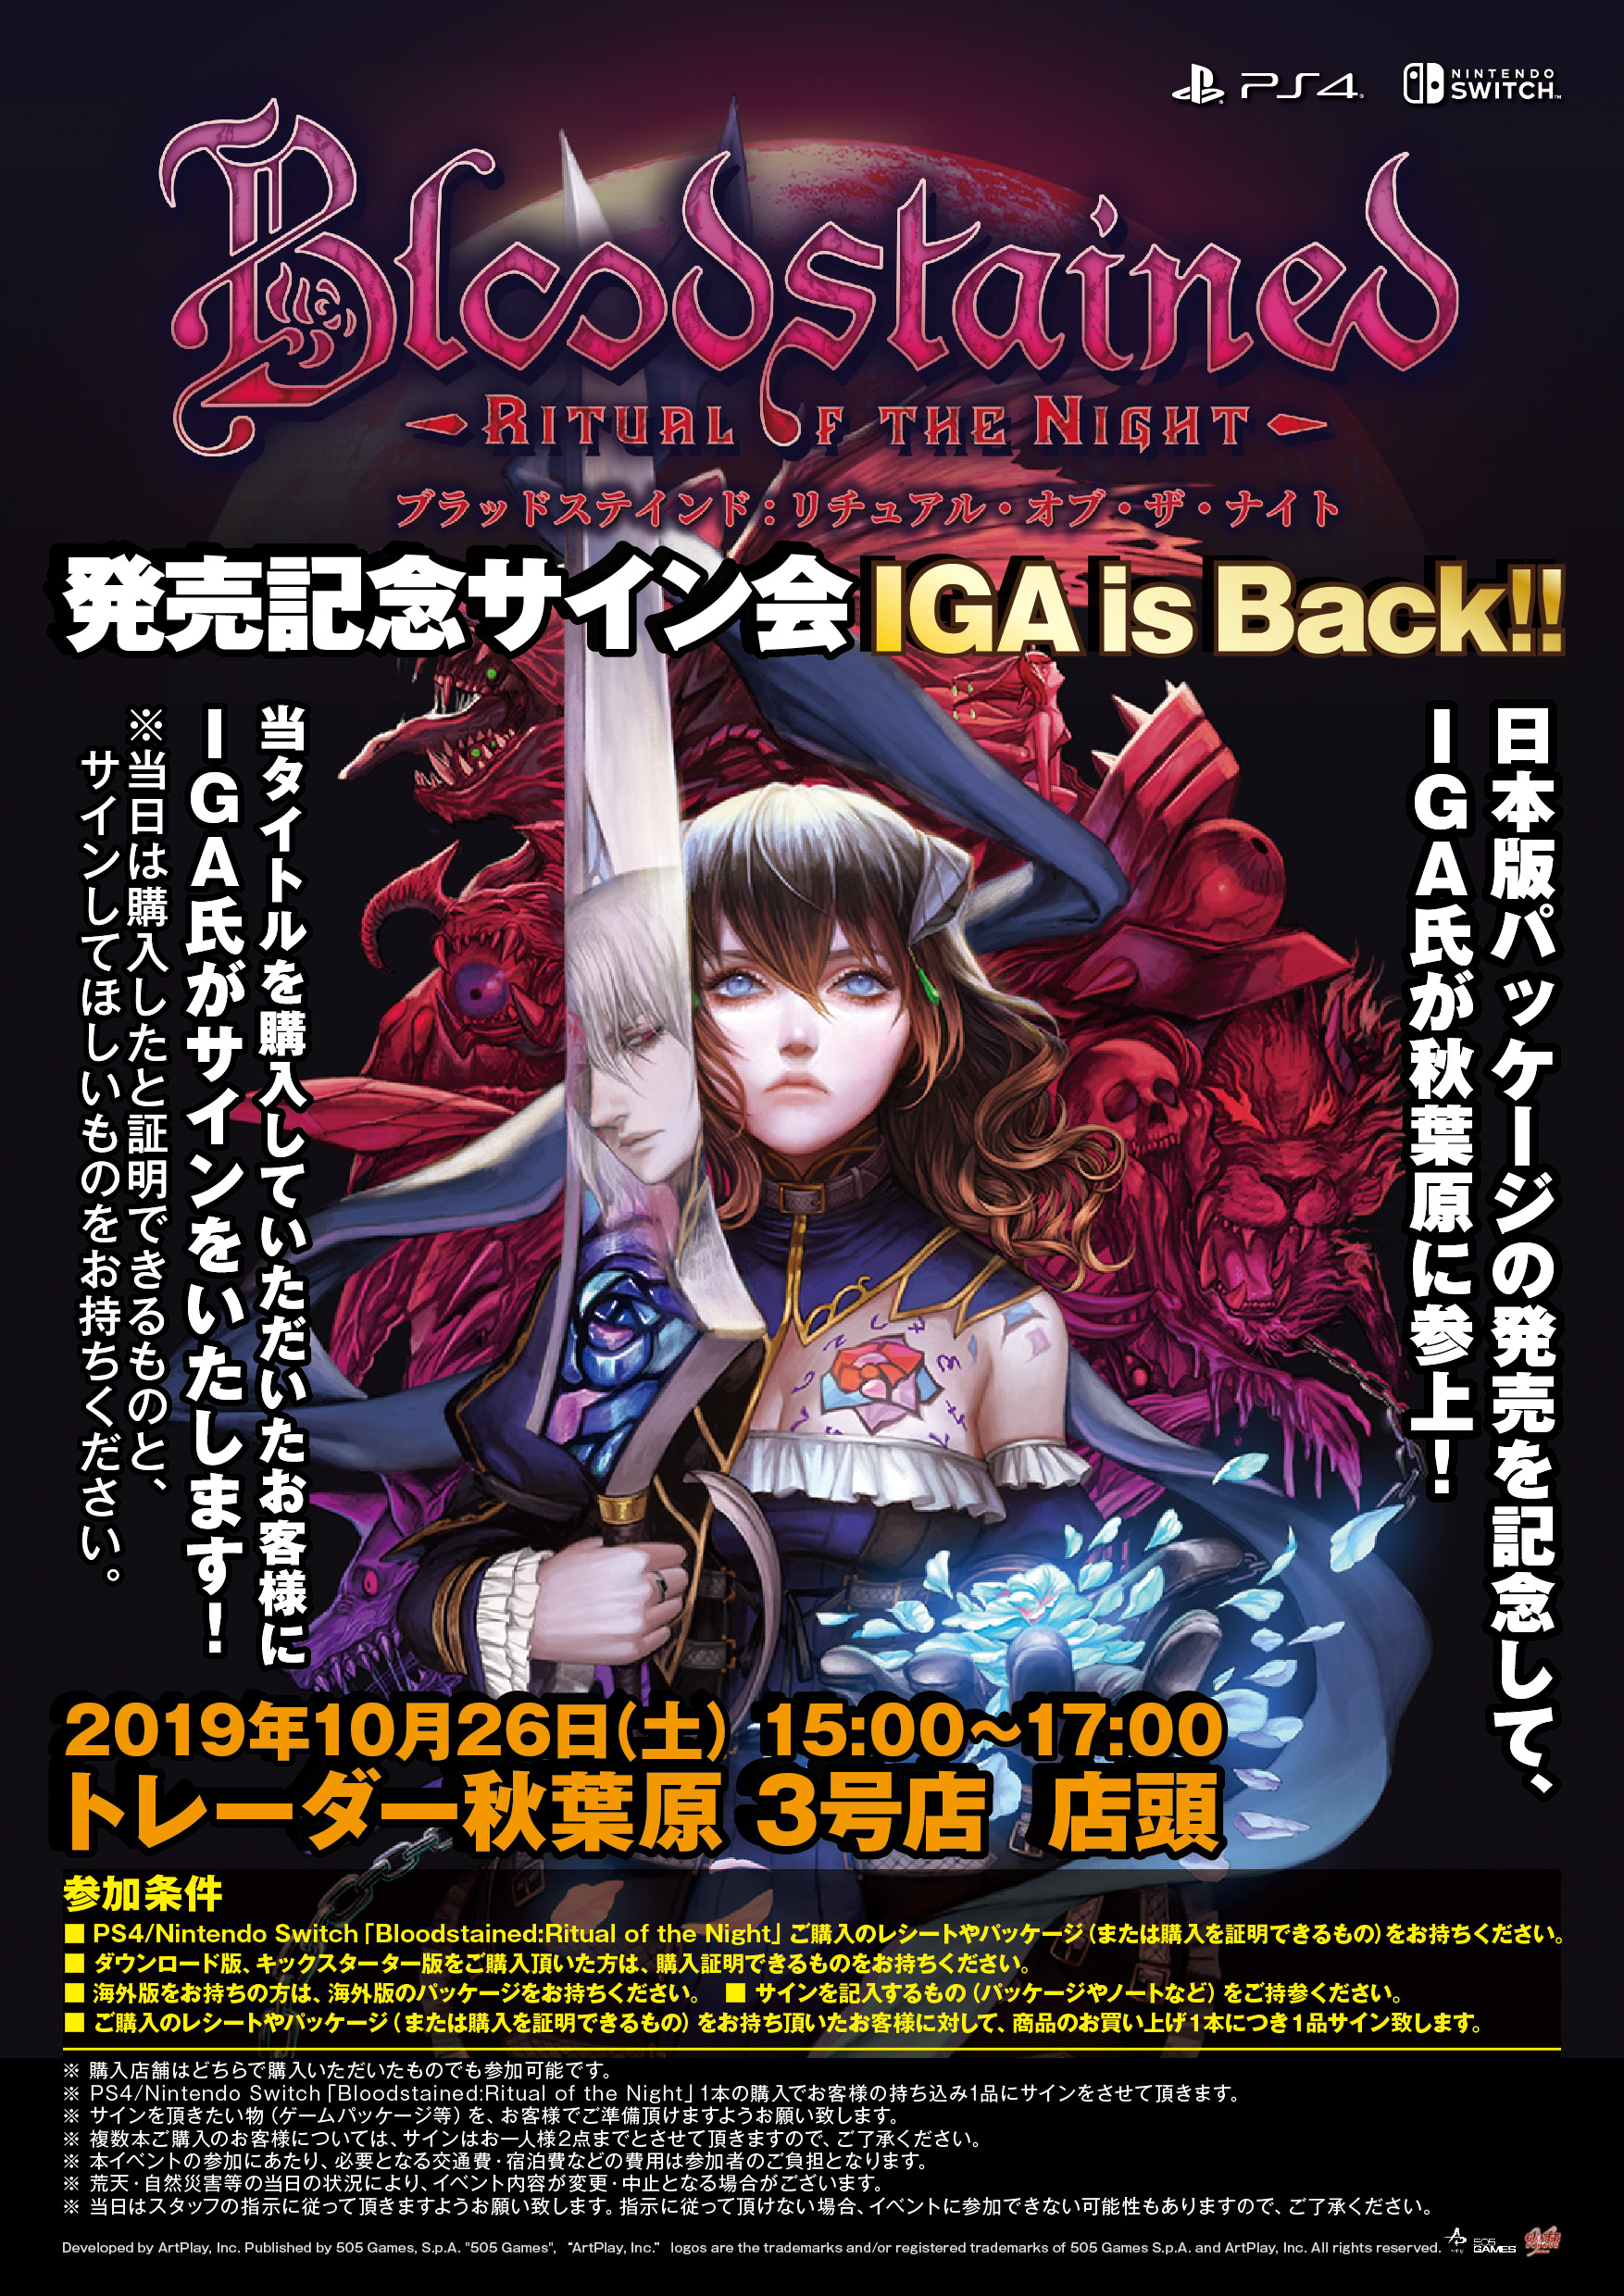 Bloodstained: Ritual of the Night』発売記念のサイン会が10月26日に